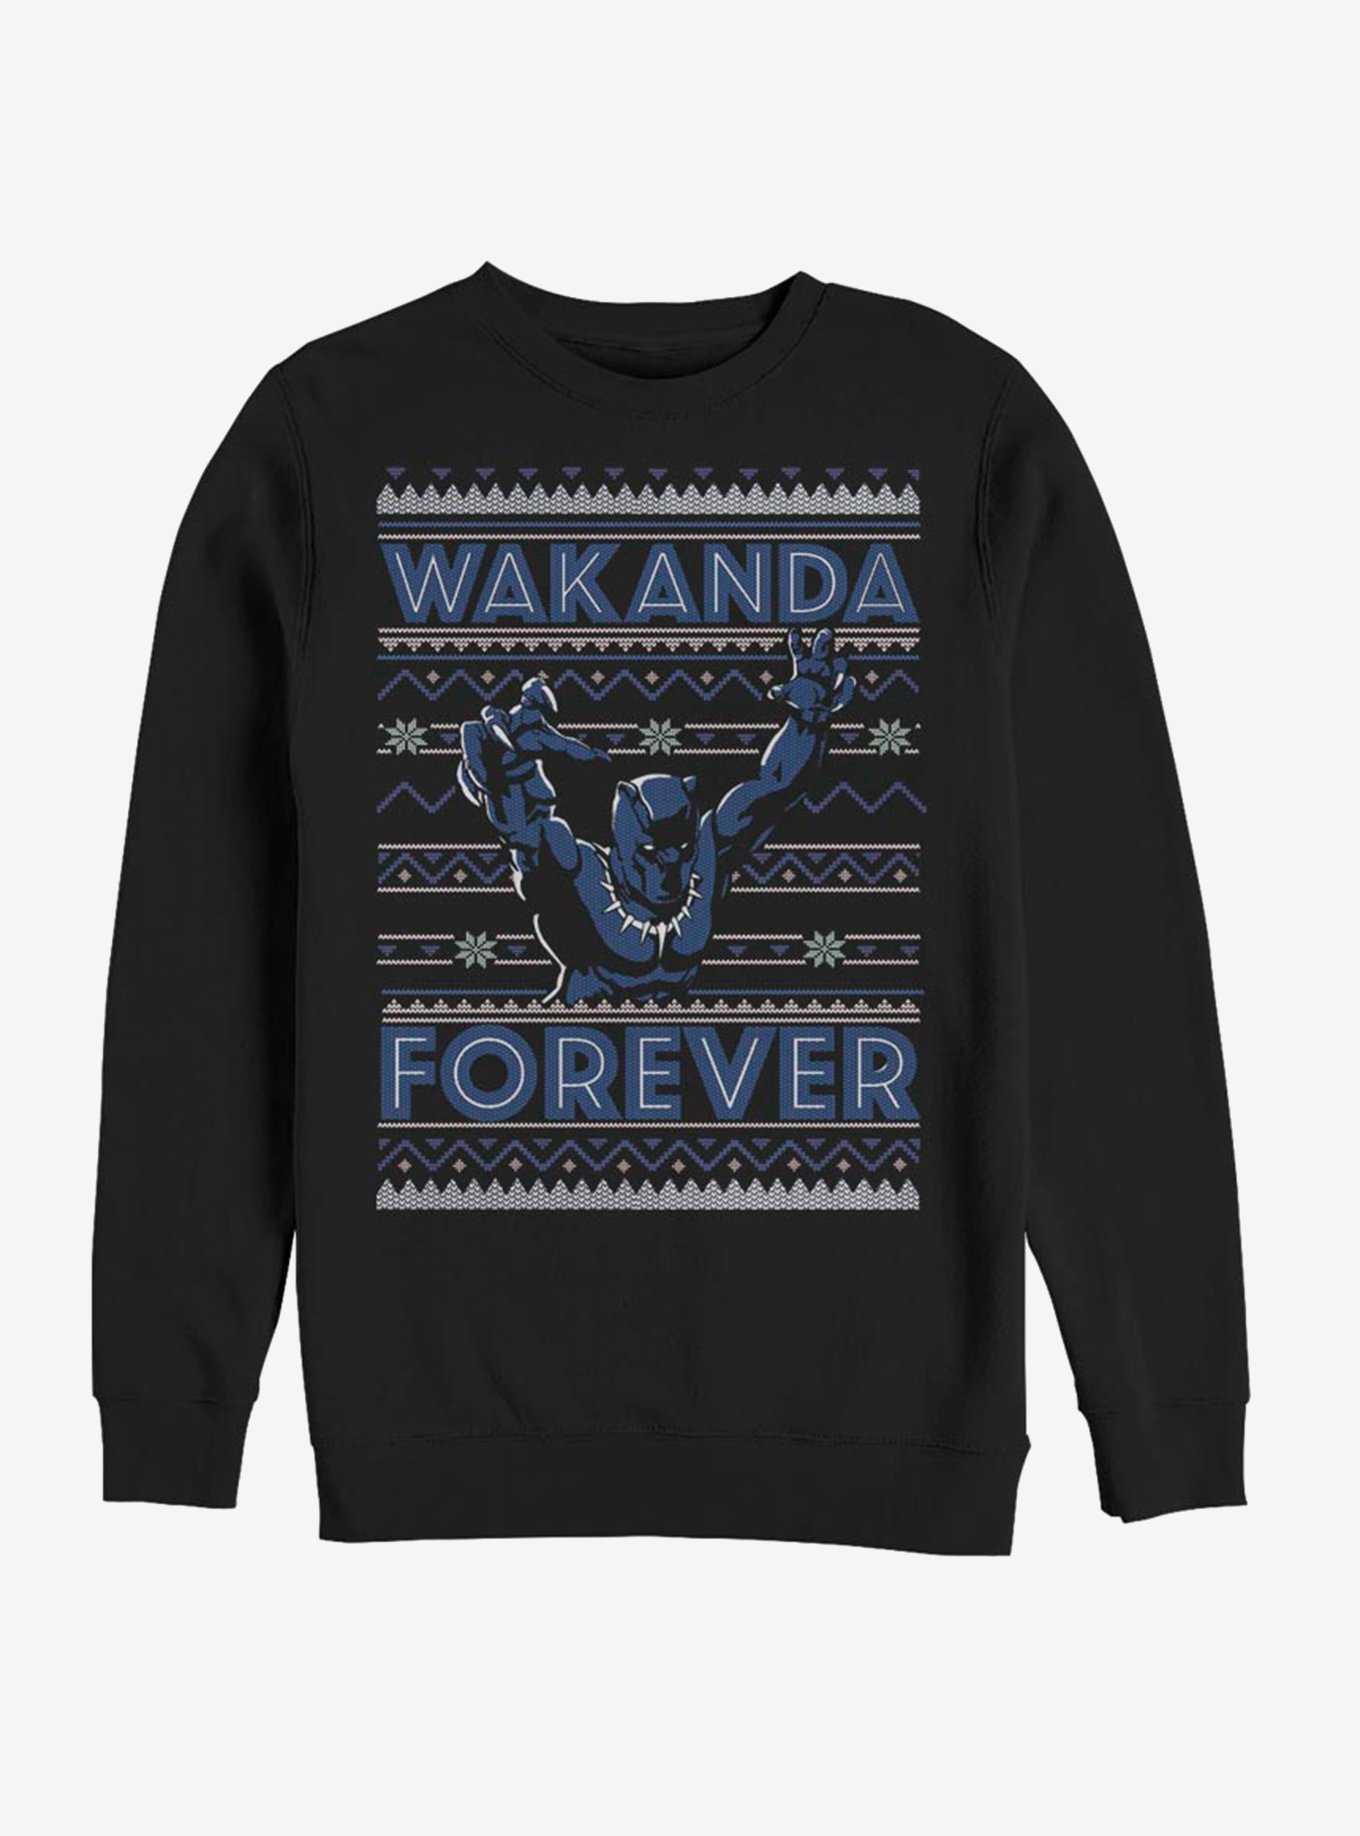 Marvel Black Panther Wakanda Forever Ugly Christmas Crew Sweater, , hi-res